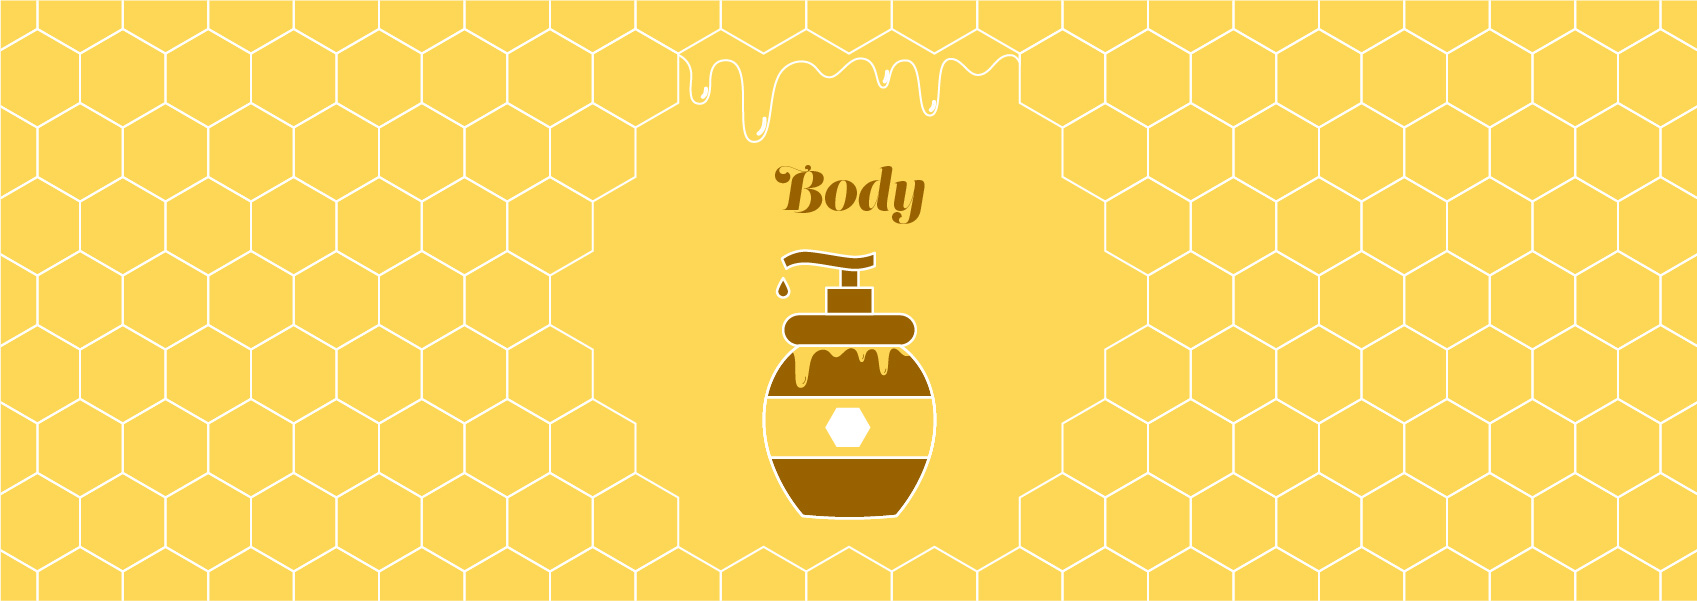 illustration of honeycomb, body was in the shape of honey bottle